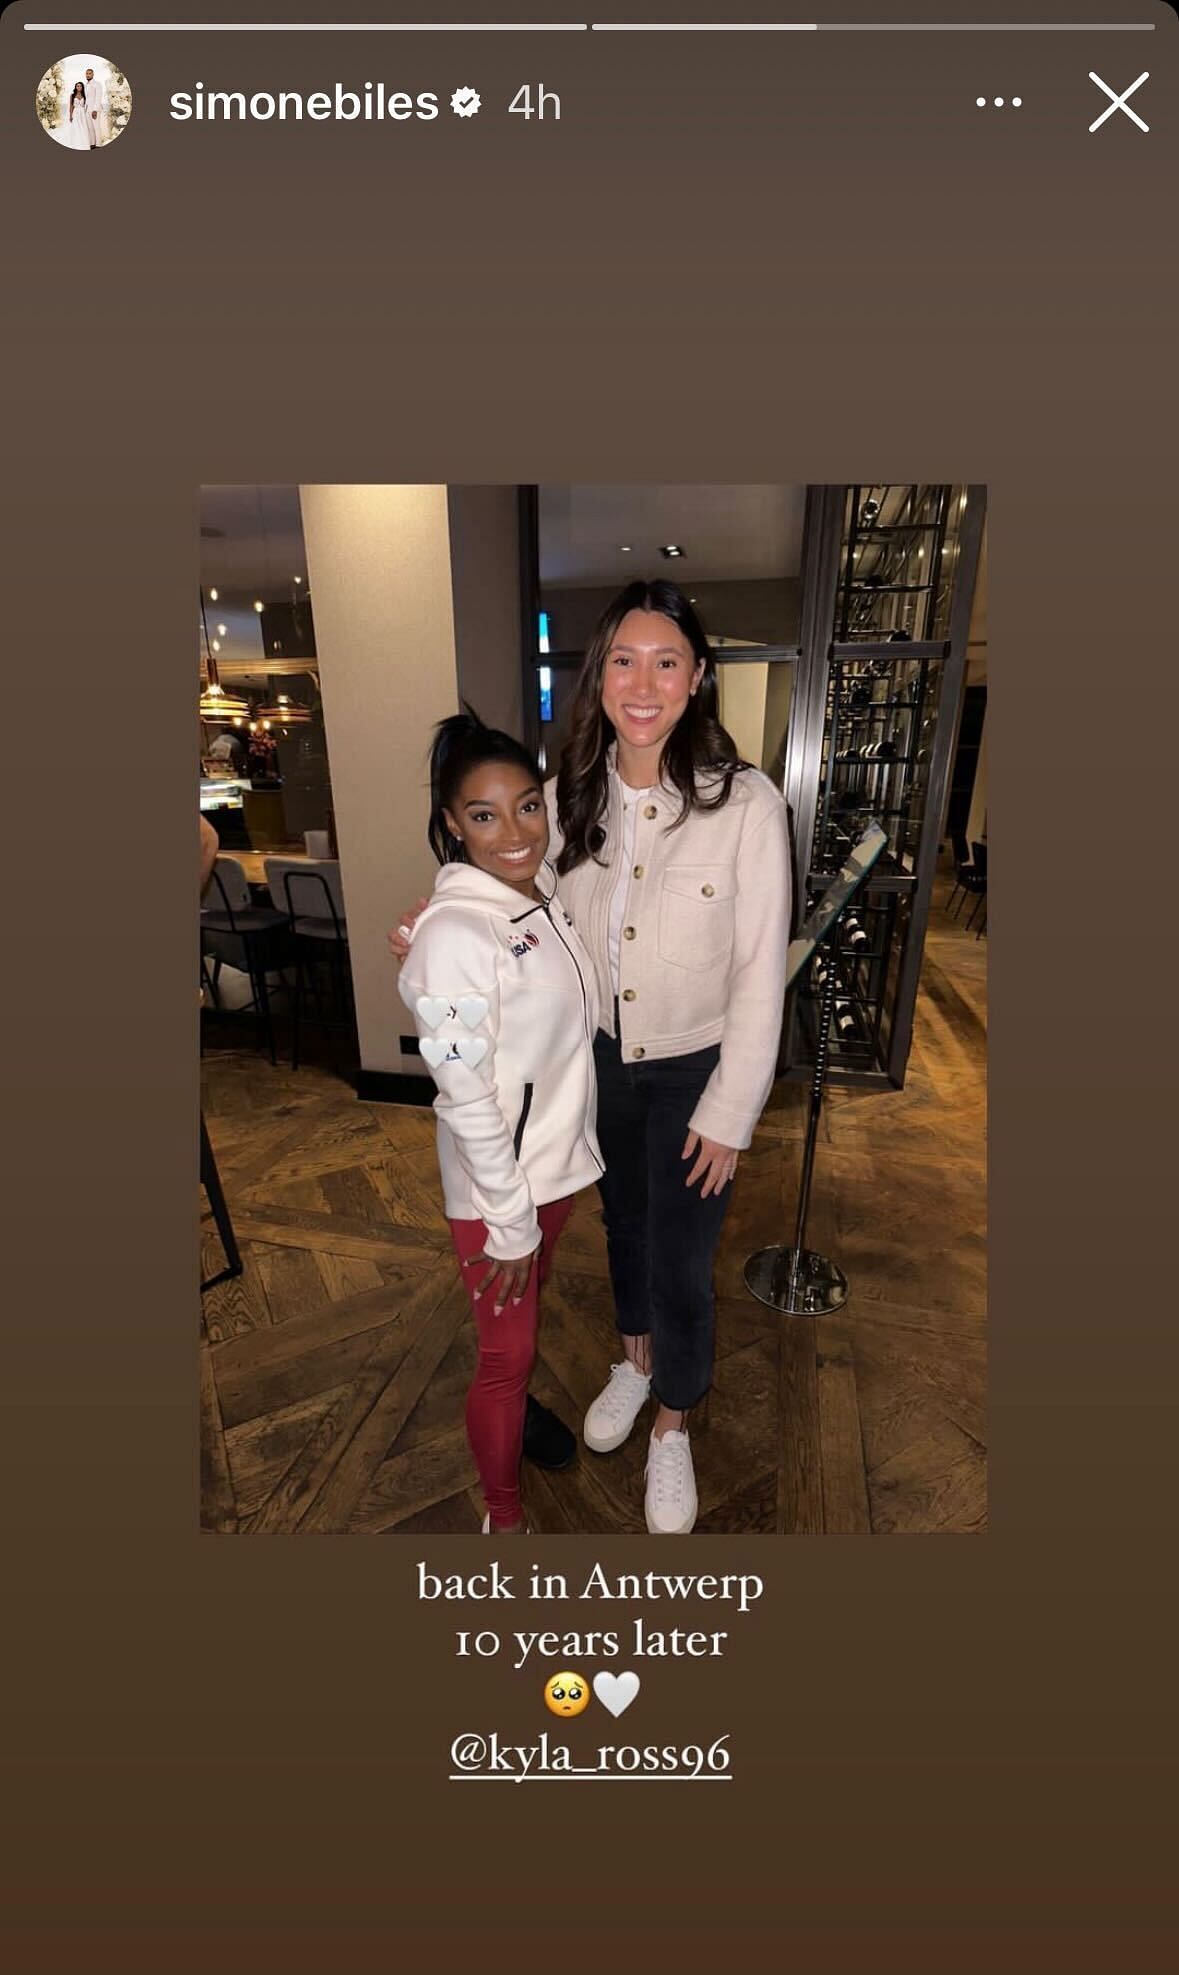 Simone Biles shared a picture of her with former American Gymnast on her Instagram story